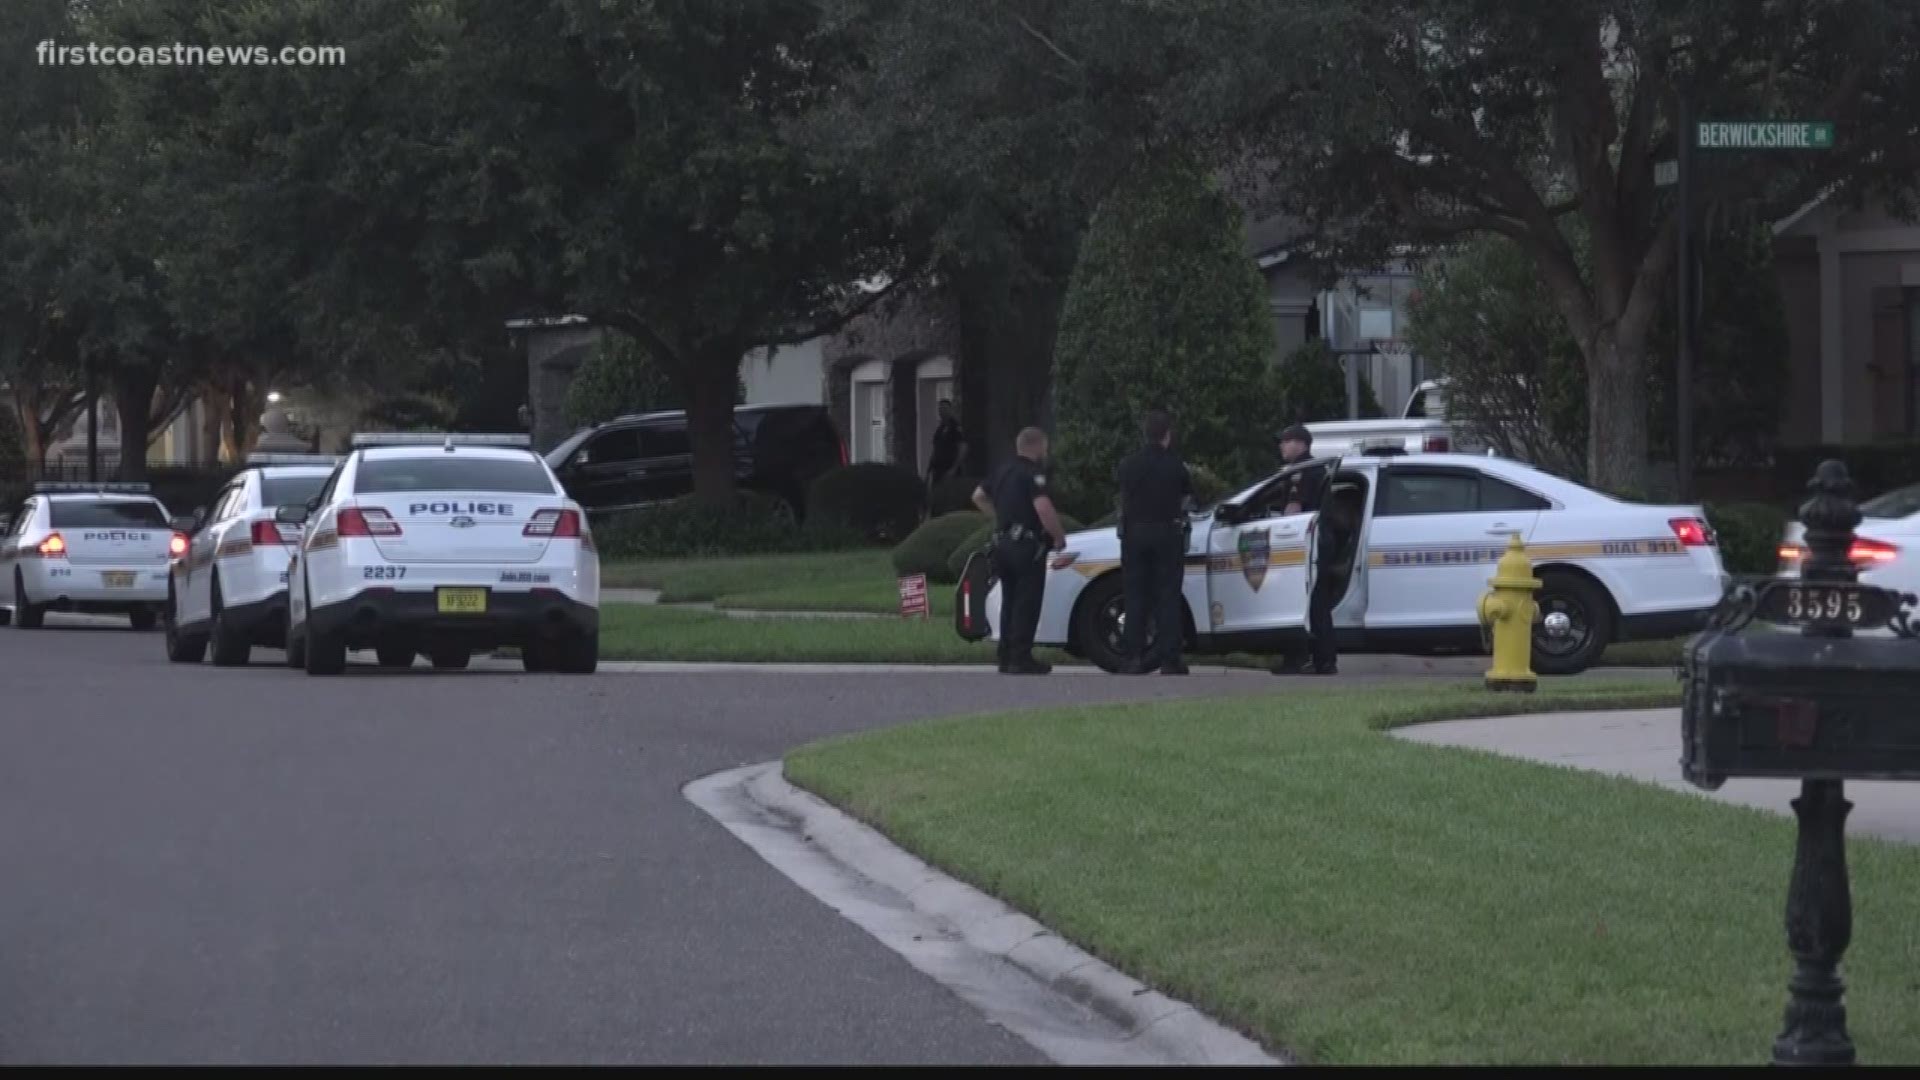 The person taken into custody has not been confirmed to be former UF Gator and Raines High School football player Jabar Gaffney, but multiple neighbors report seeing the man fitting the description of Gaffney being taken into custody.